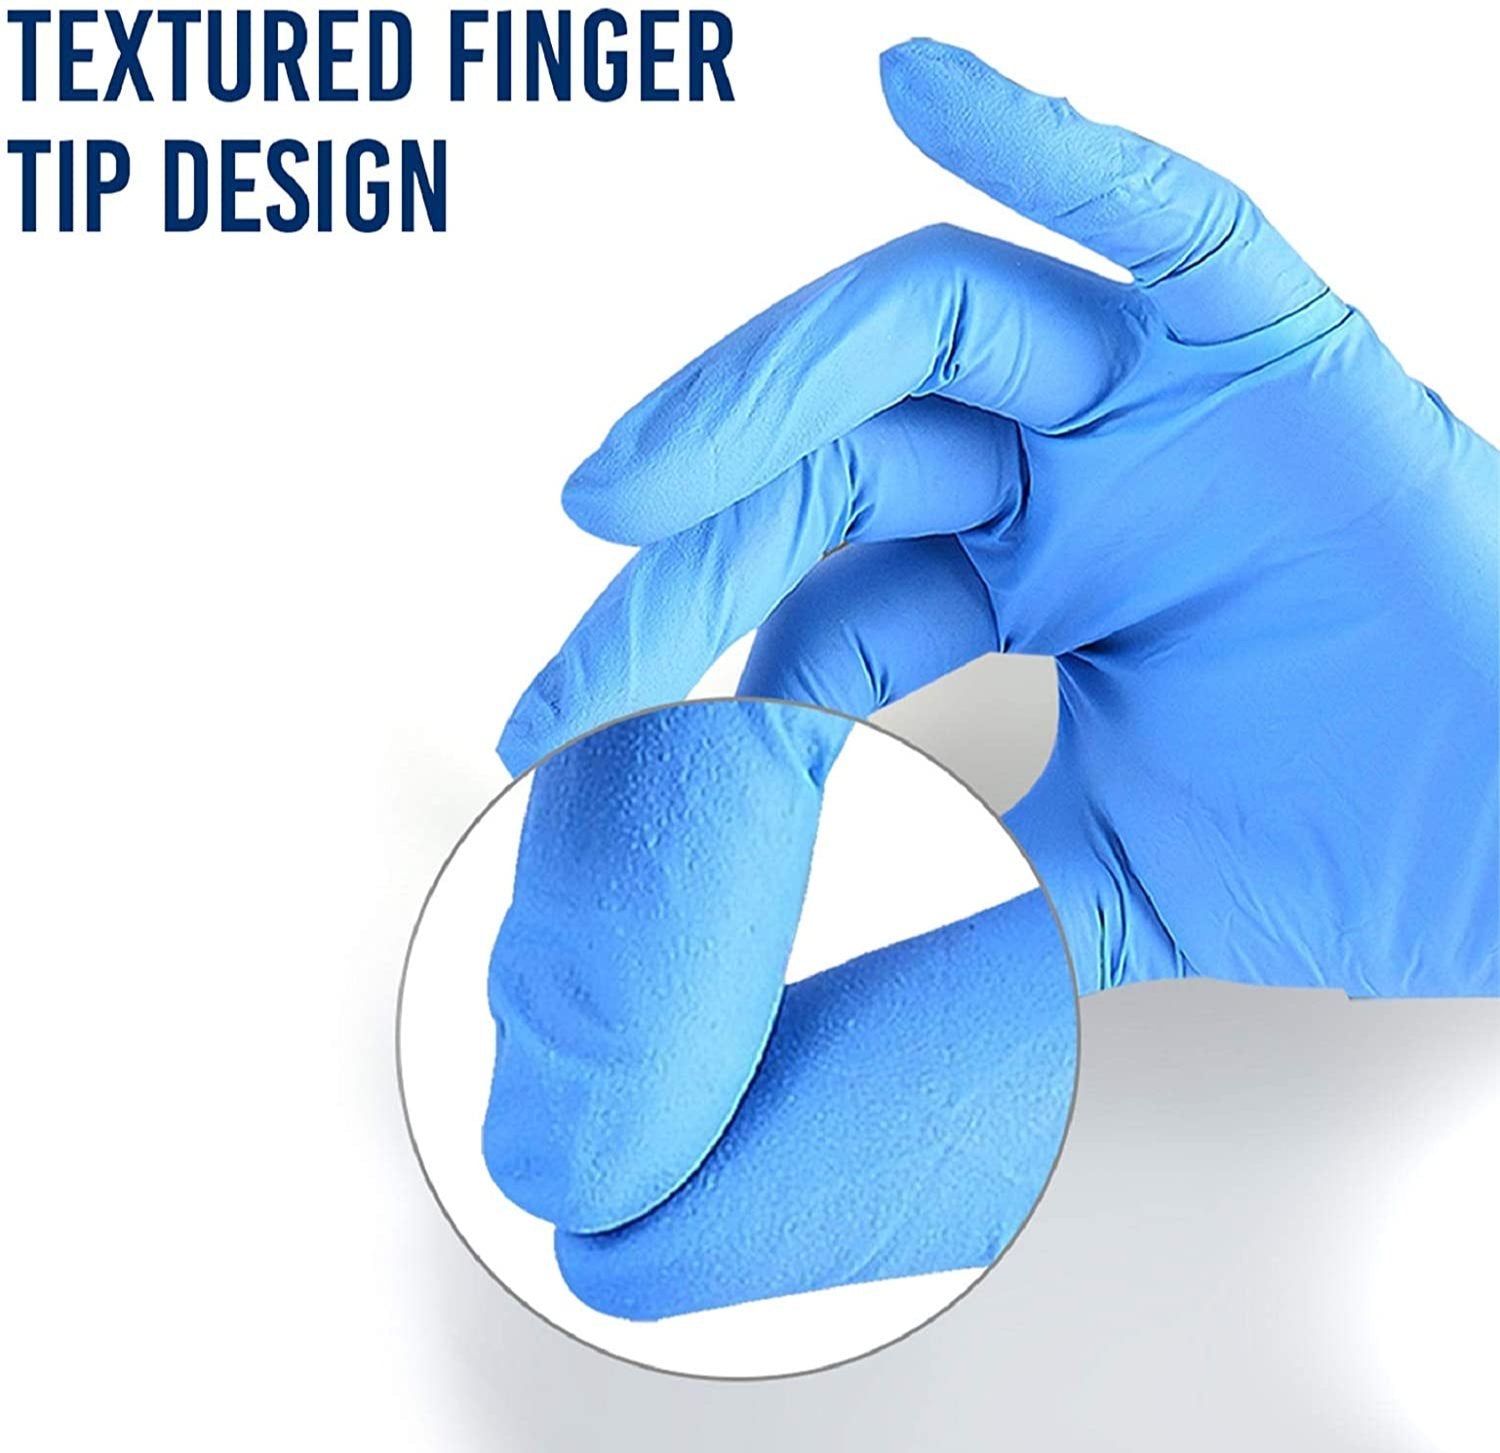 Protecting the Hands of Healthcare Providers: Latex & Nitrile Examination Glove